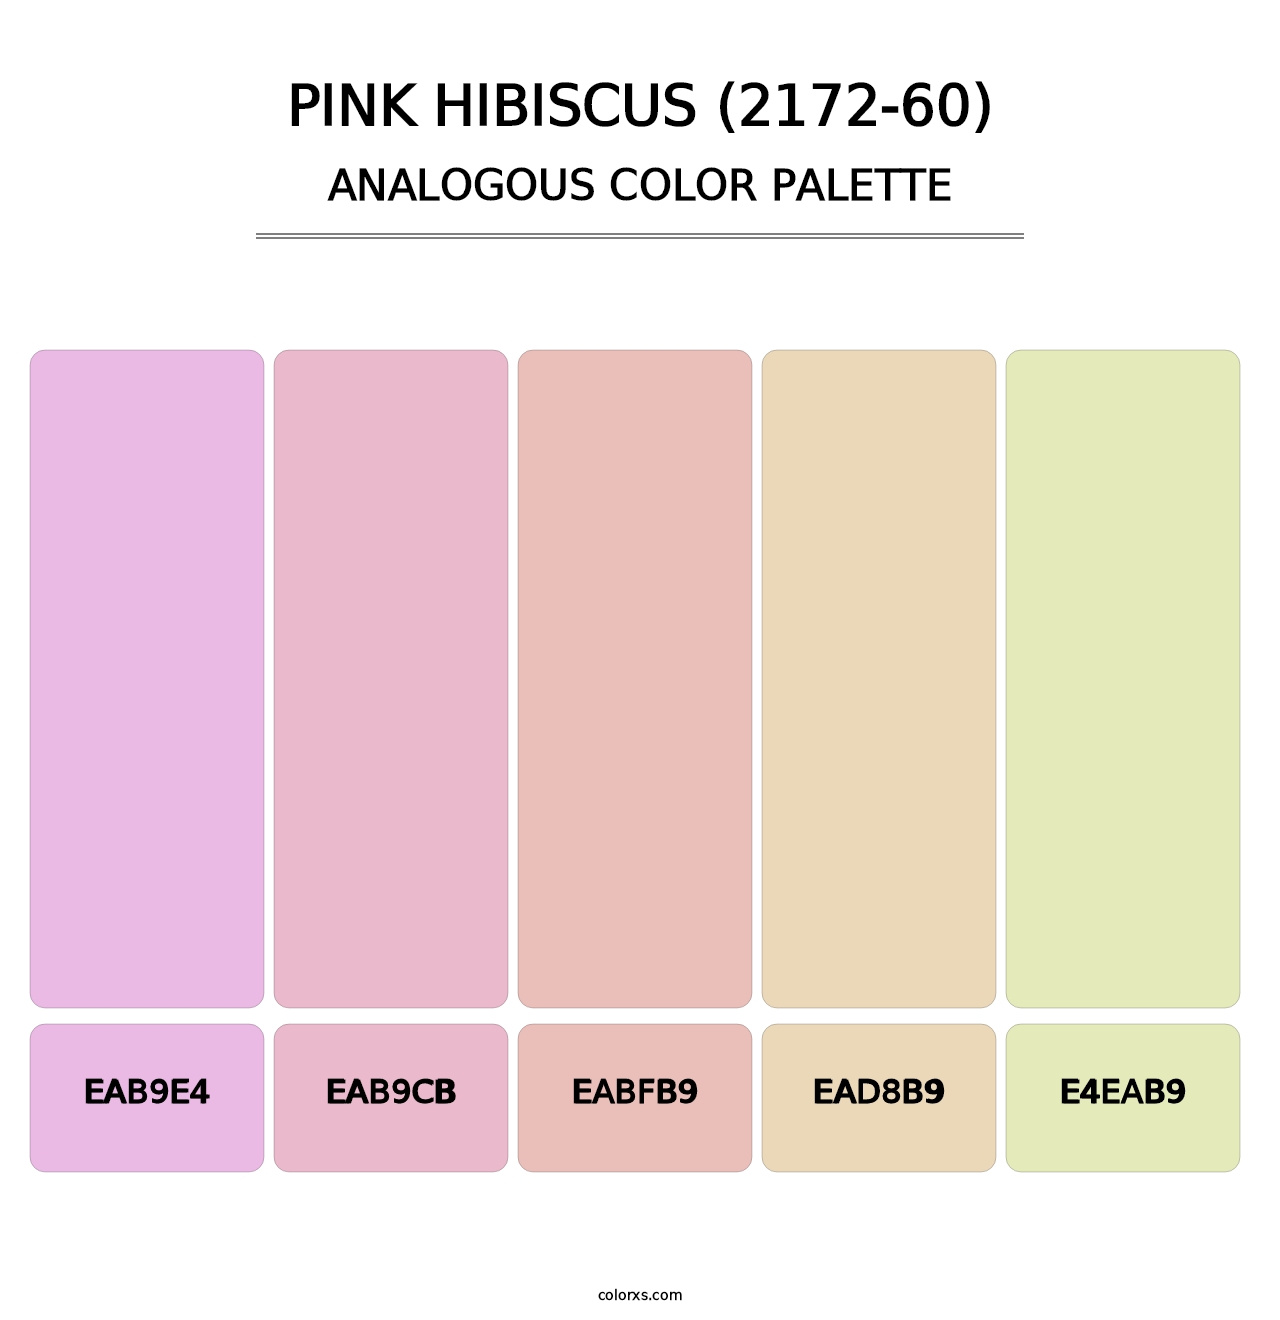 Pink Hibiscus (2172-60) - Analogous Color Palette